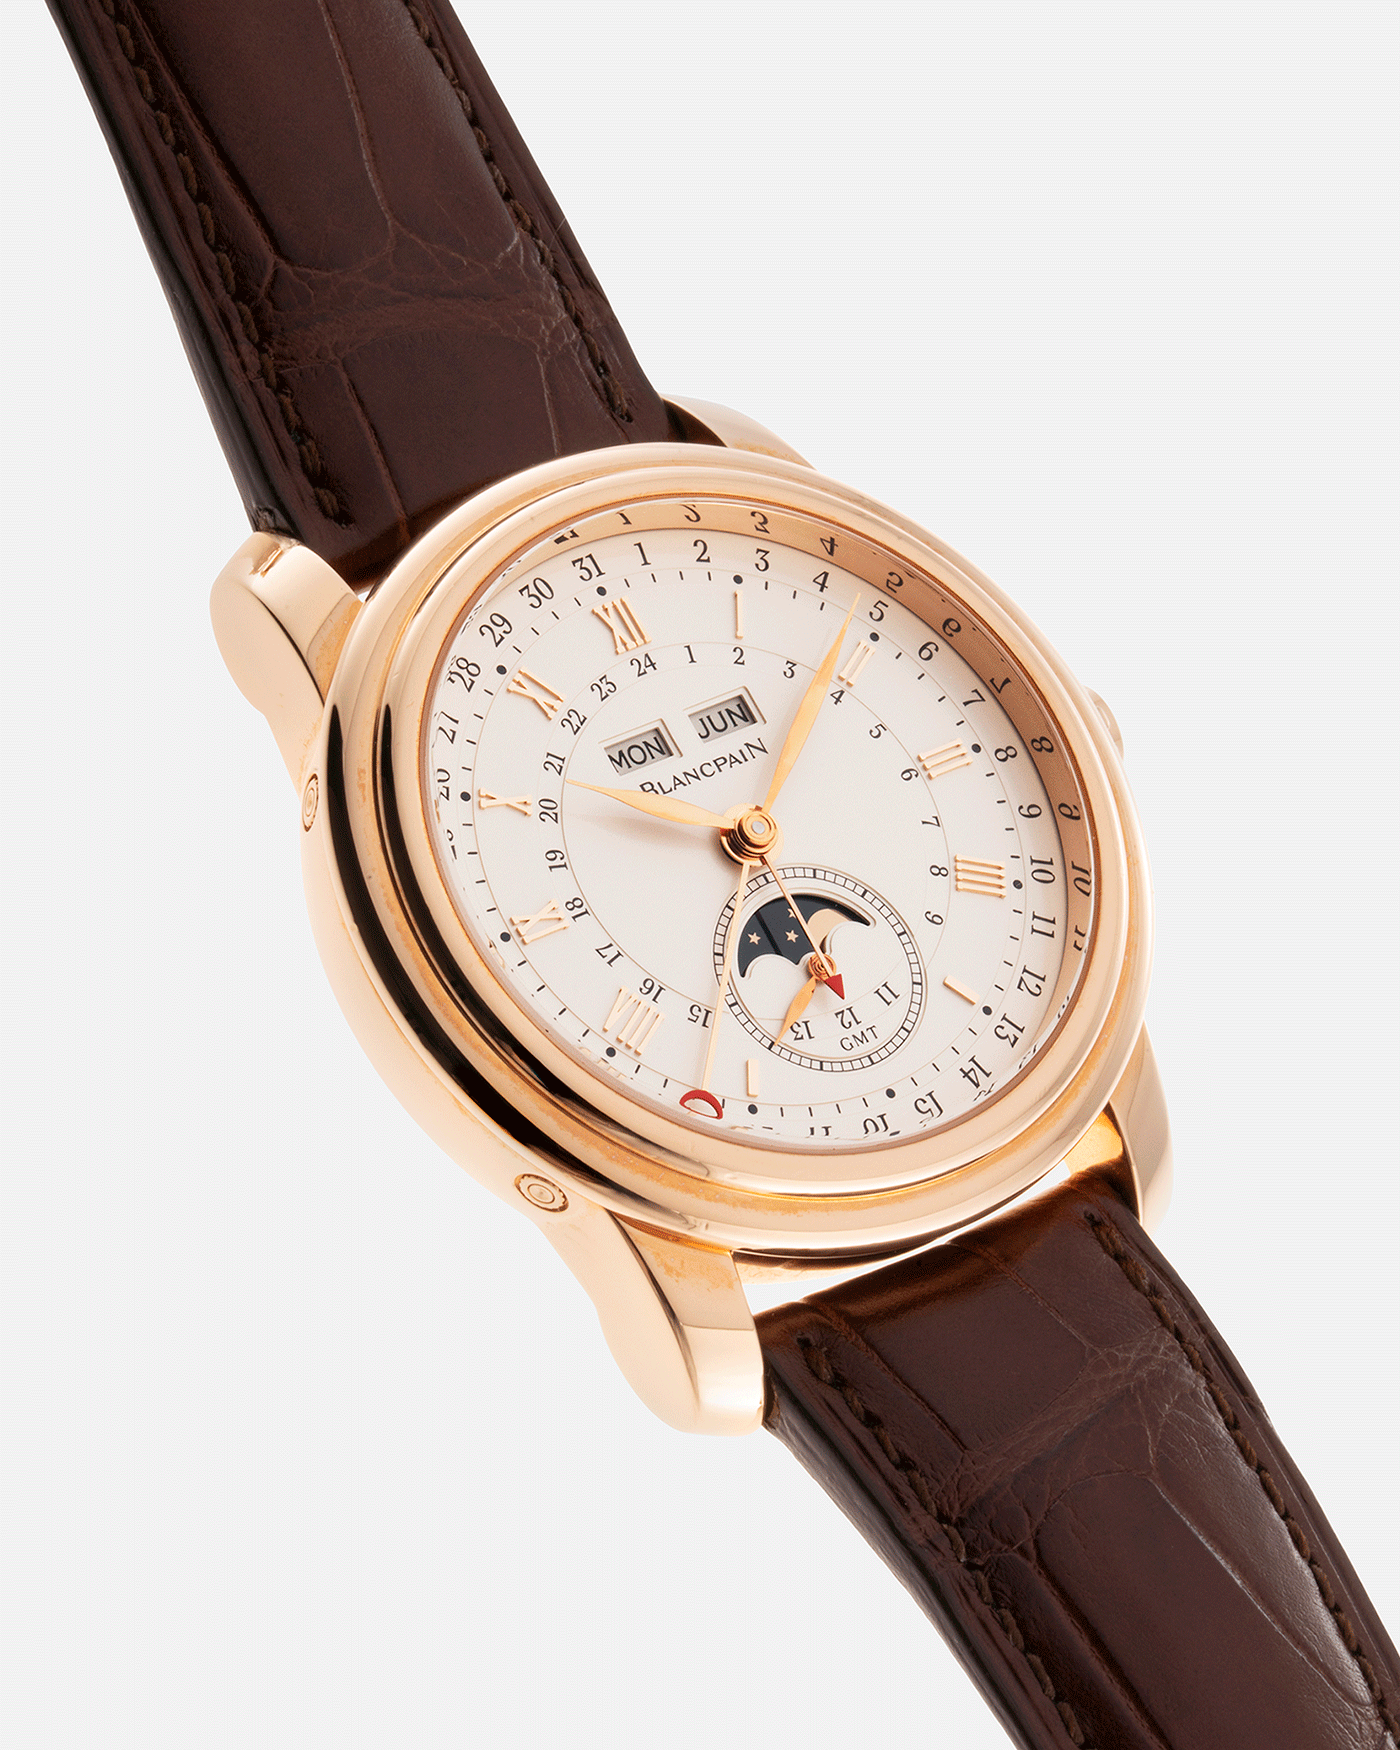 Brand: Blancpain Year: 2009 Model: Le Brassus Reference Number: 4276-3642-55B Material: Rose Gold Movement: Cal. 67A6 Case Diameter: 42mm Bracelet/Strap: Blancpain Brown Alligator Strap with 18k Rose Gold Deployant Clasp